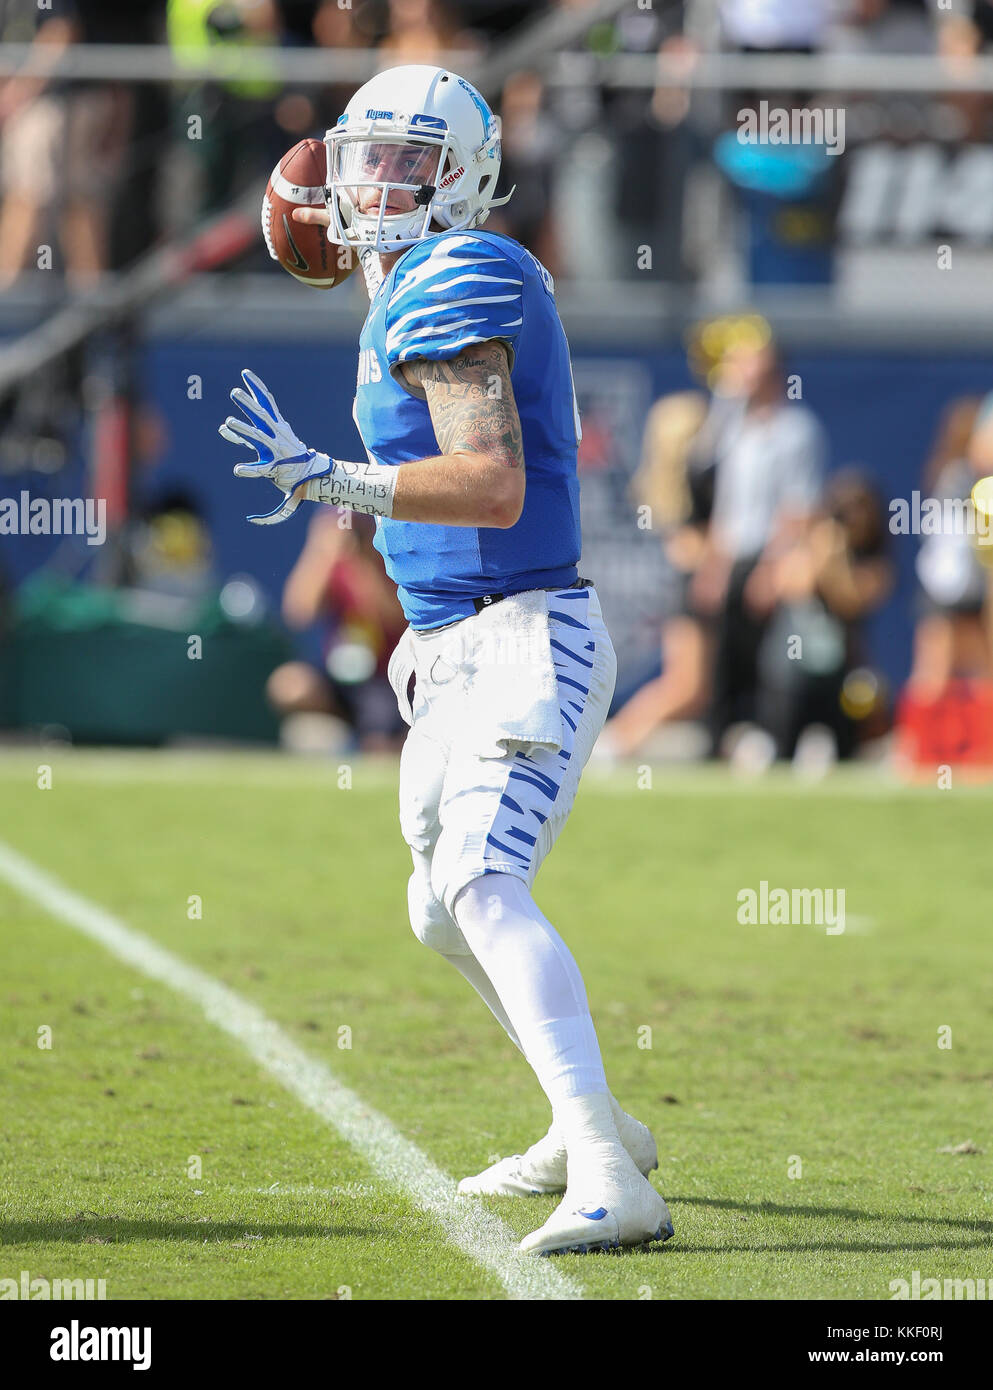 Orlando, FL, USA. 2nd Dec, 2017. Memphis QB Riley Ferguson #4 about to throw a pass during the AAC Championship football game between the UCF Knights and the Memphis Tigers at the Spectrum Stadium in Orlando, FL. Kyle Okita/CSM/Alamy Live News Stock Photo